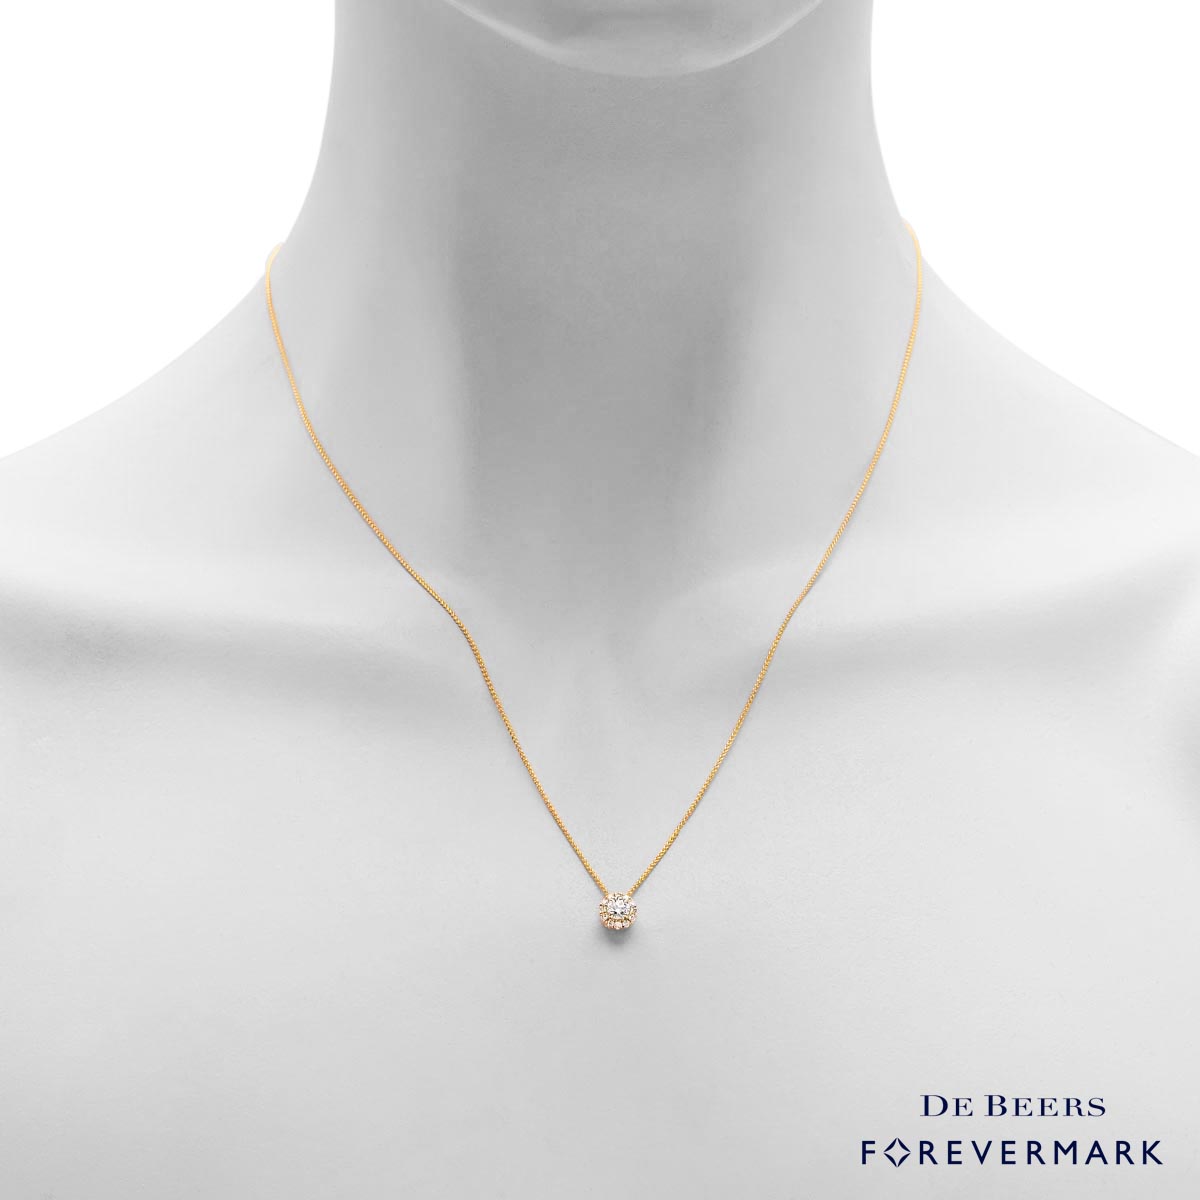 De Beers Forevermark Center of My Universe Diamond Necklace in 18kt Yellow Gold (1/3ct tw)